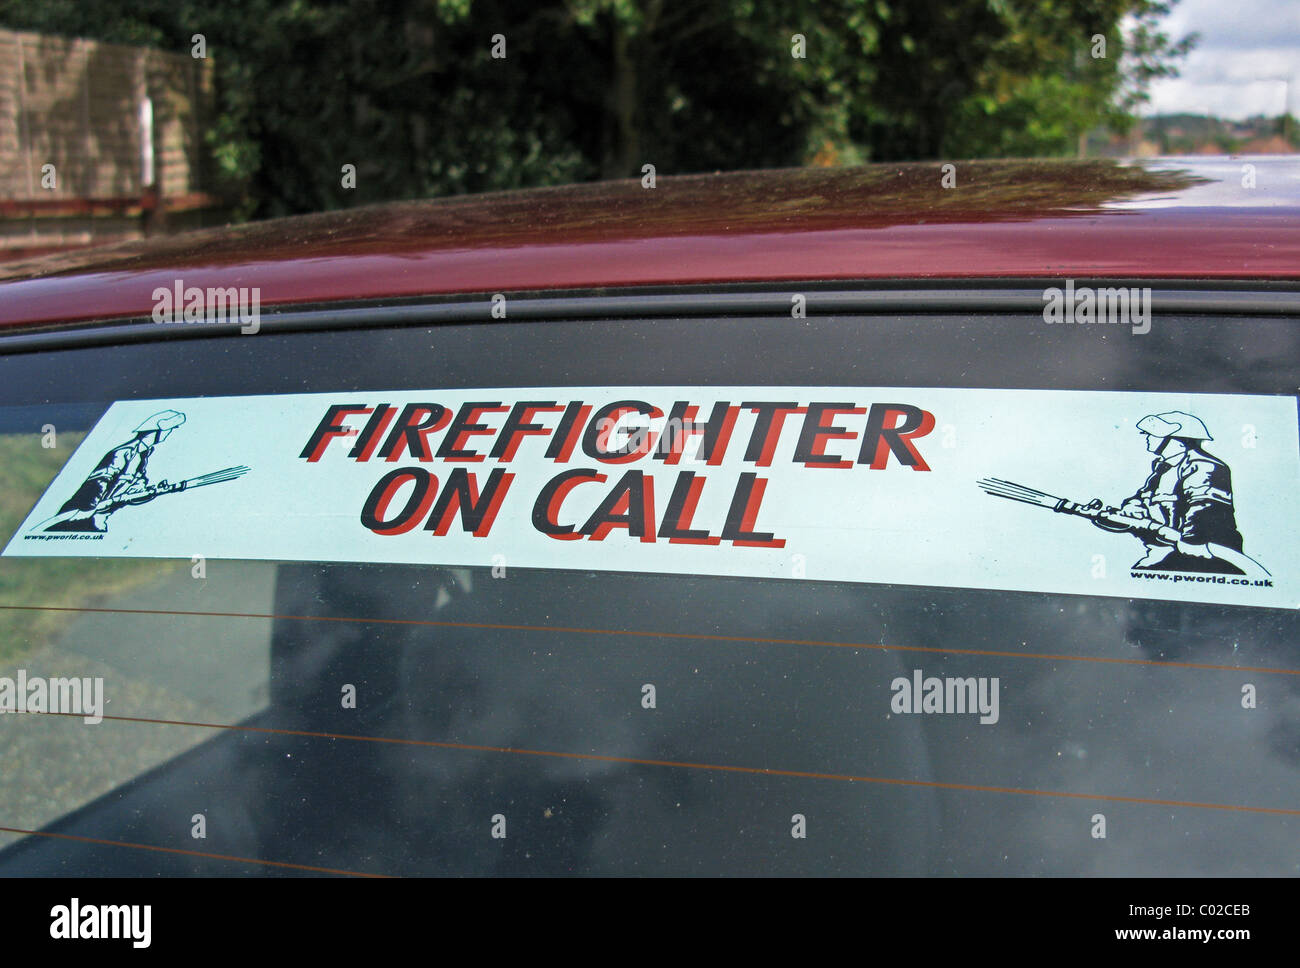 Firefighter On Call sign on a car widow Stock Photo